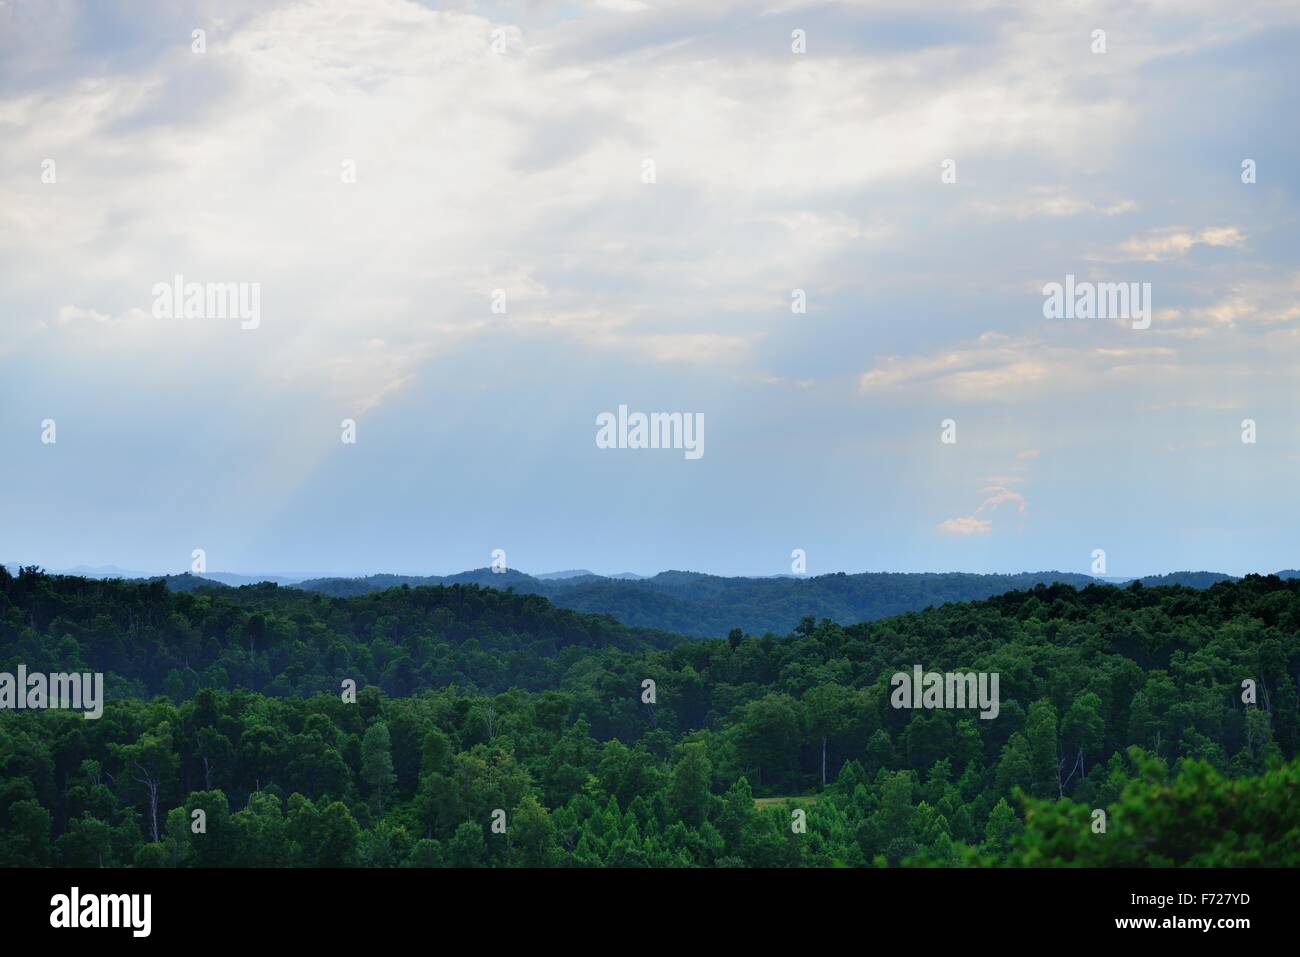 An amazing evening sky with rays of light shining through above a green forest with a lake in the center. Stock Photo